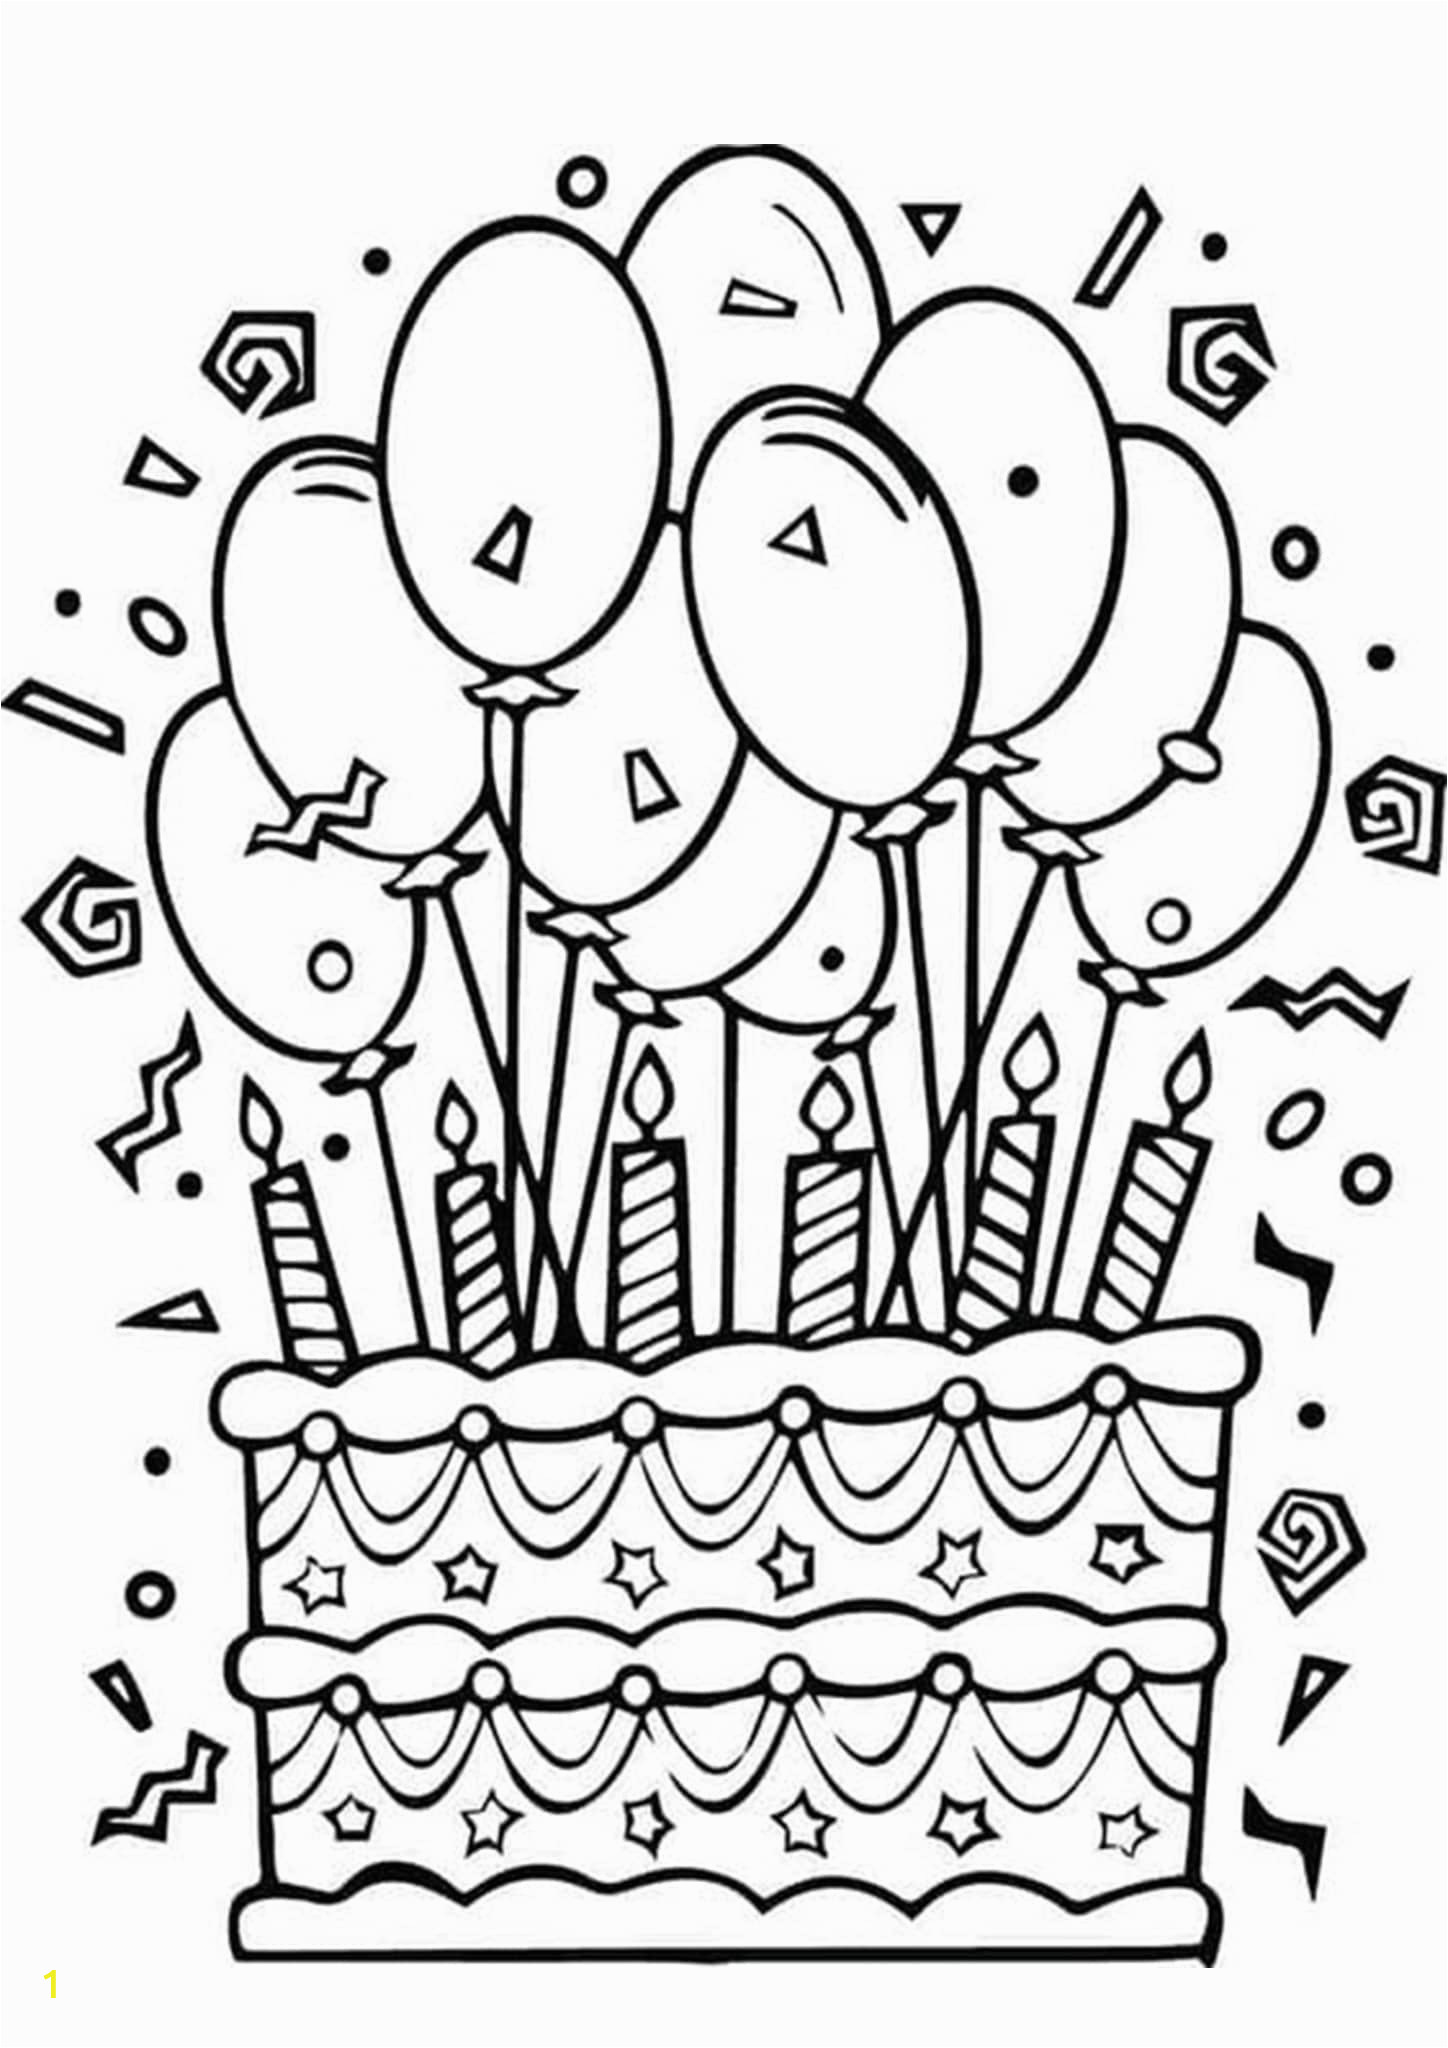 Happy Birthday Coloring Pages Printable Free Free & Easy to Print Happy Birthday Coloring Pages Tulamama